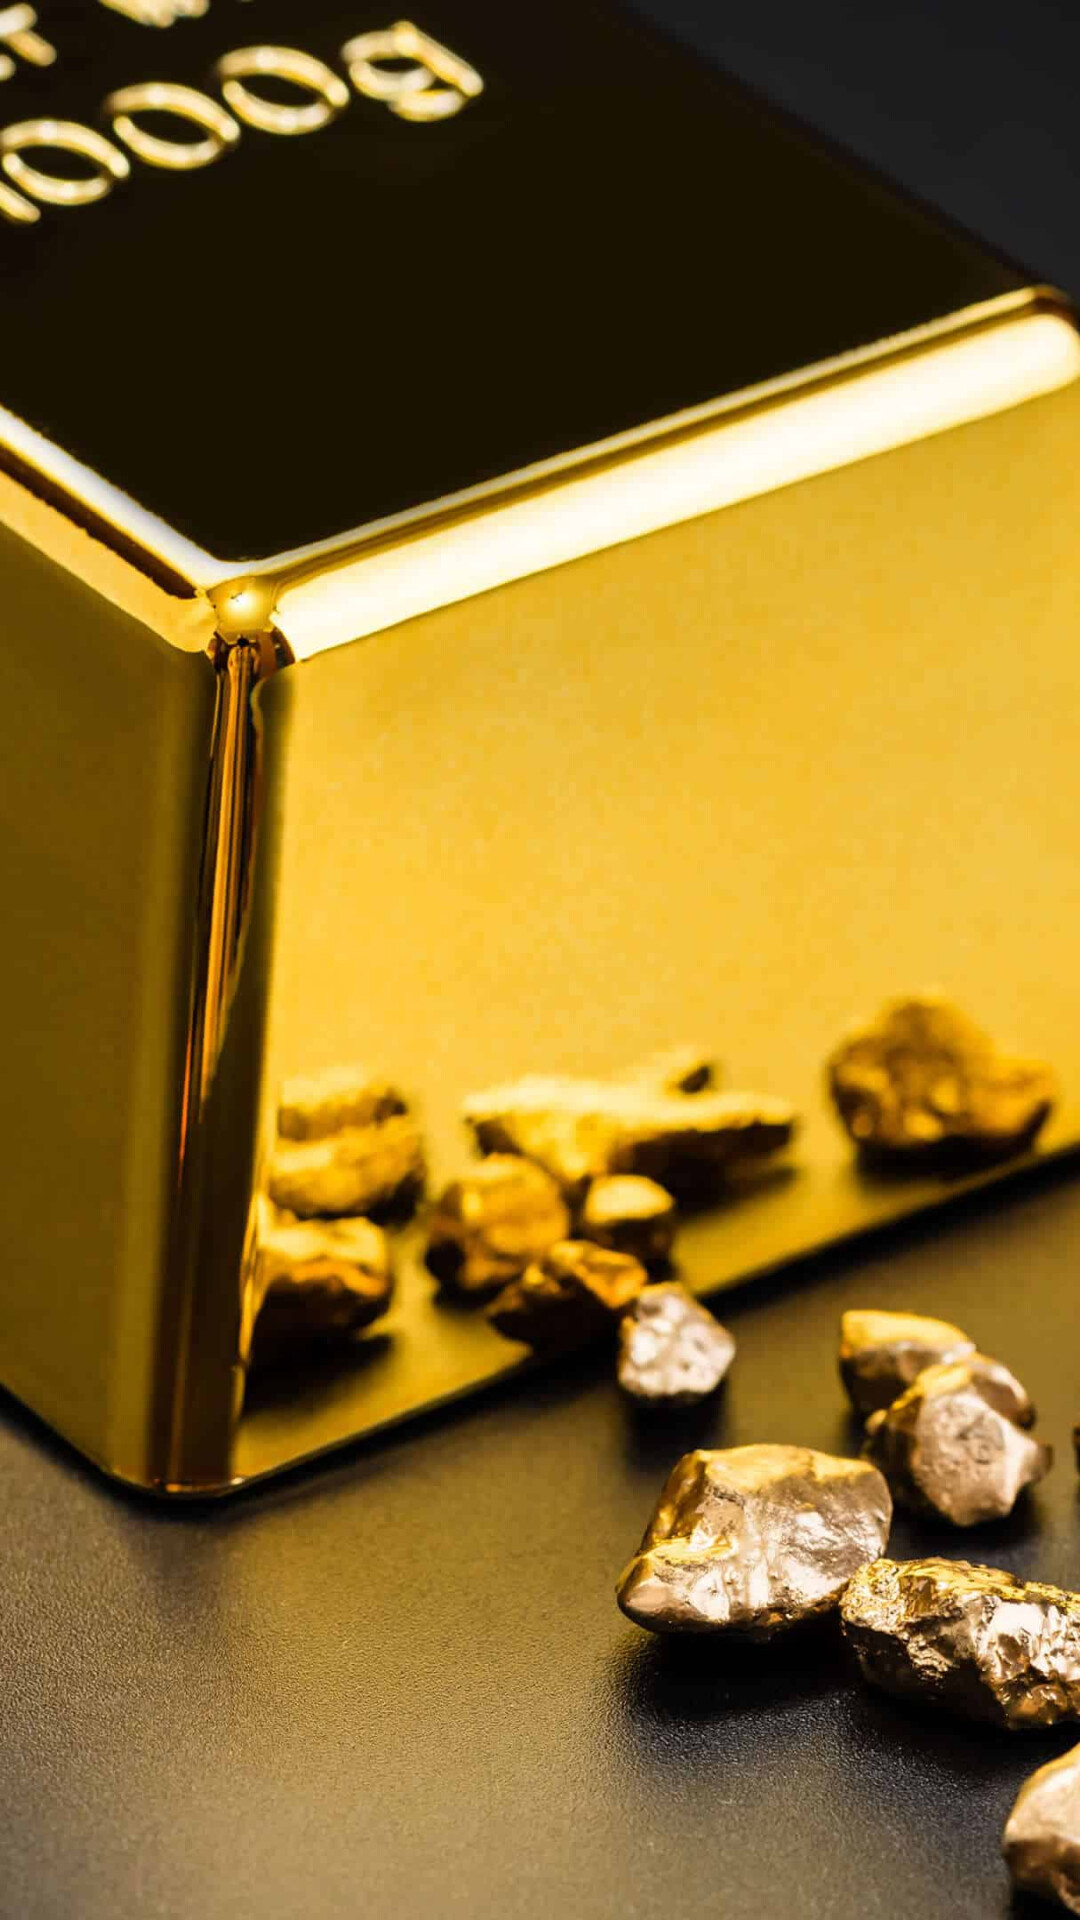 Gold: A gold nugget, A naturally occurring golden piece, A bar manufactured by minting bearing the marks. 1080x1920 Full HD Wallpaper.